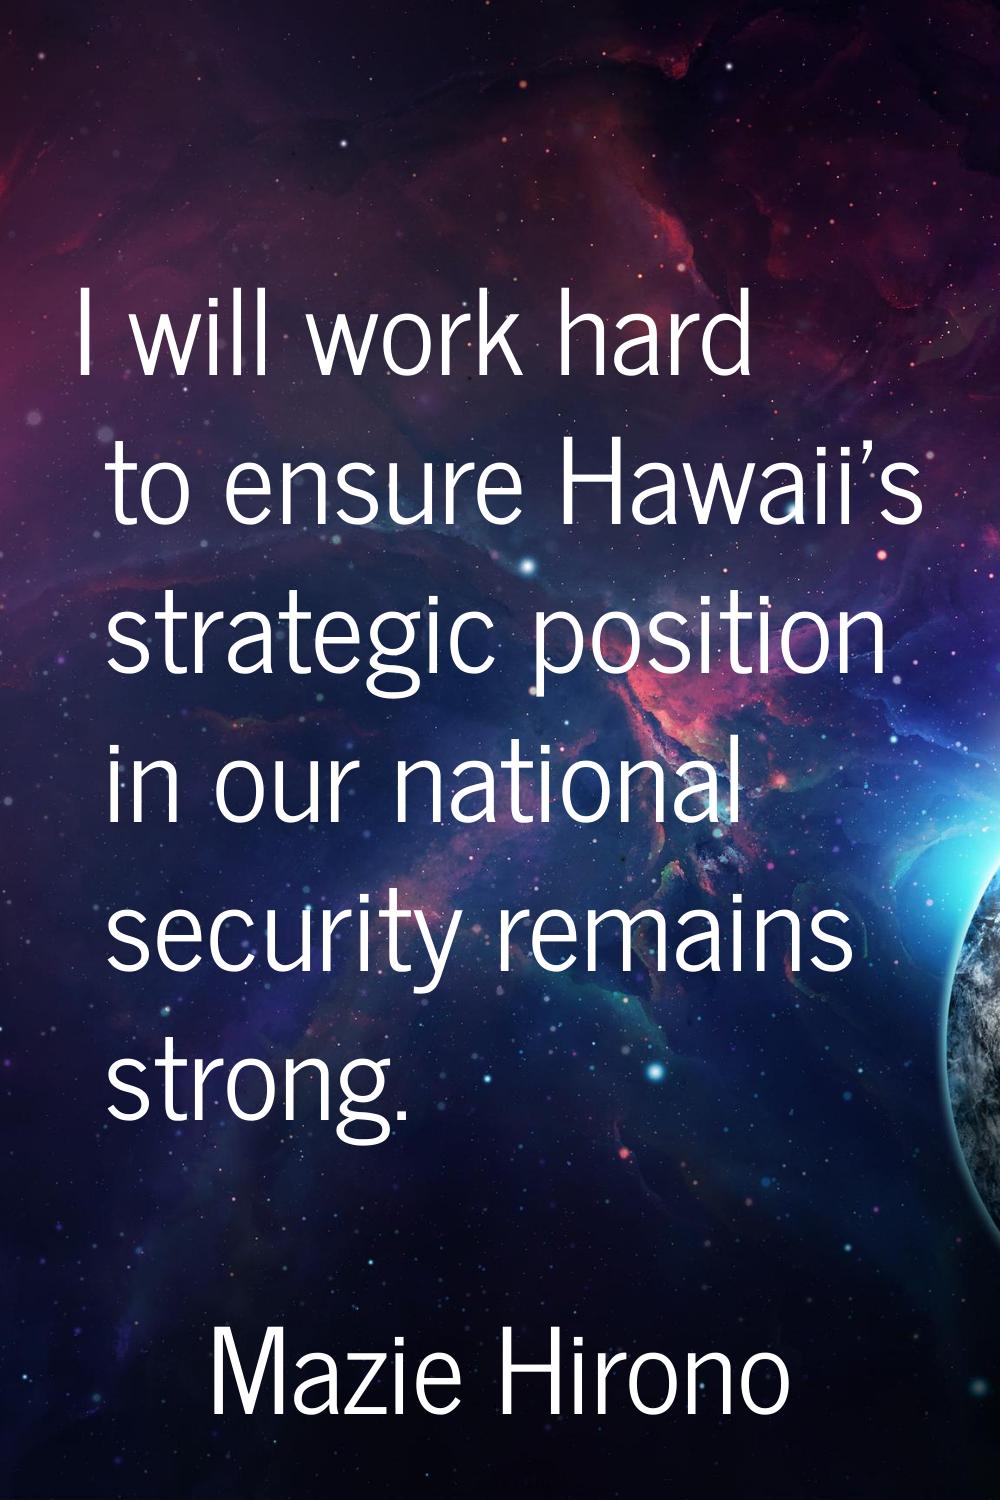 I will work hard to ensure Hawaii's strategic position in our national security remains strong.